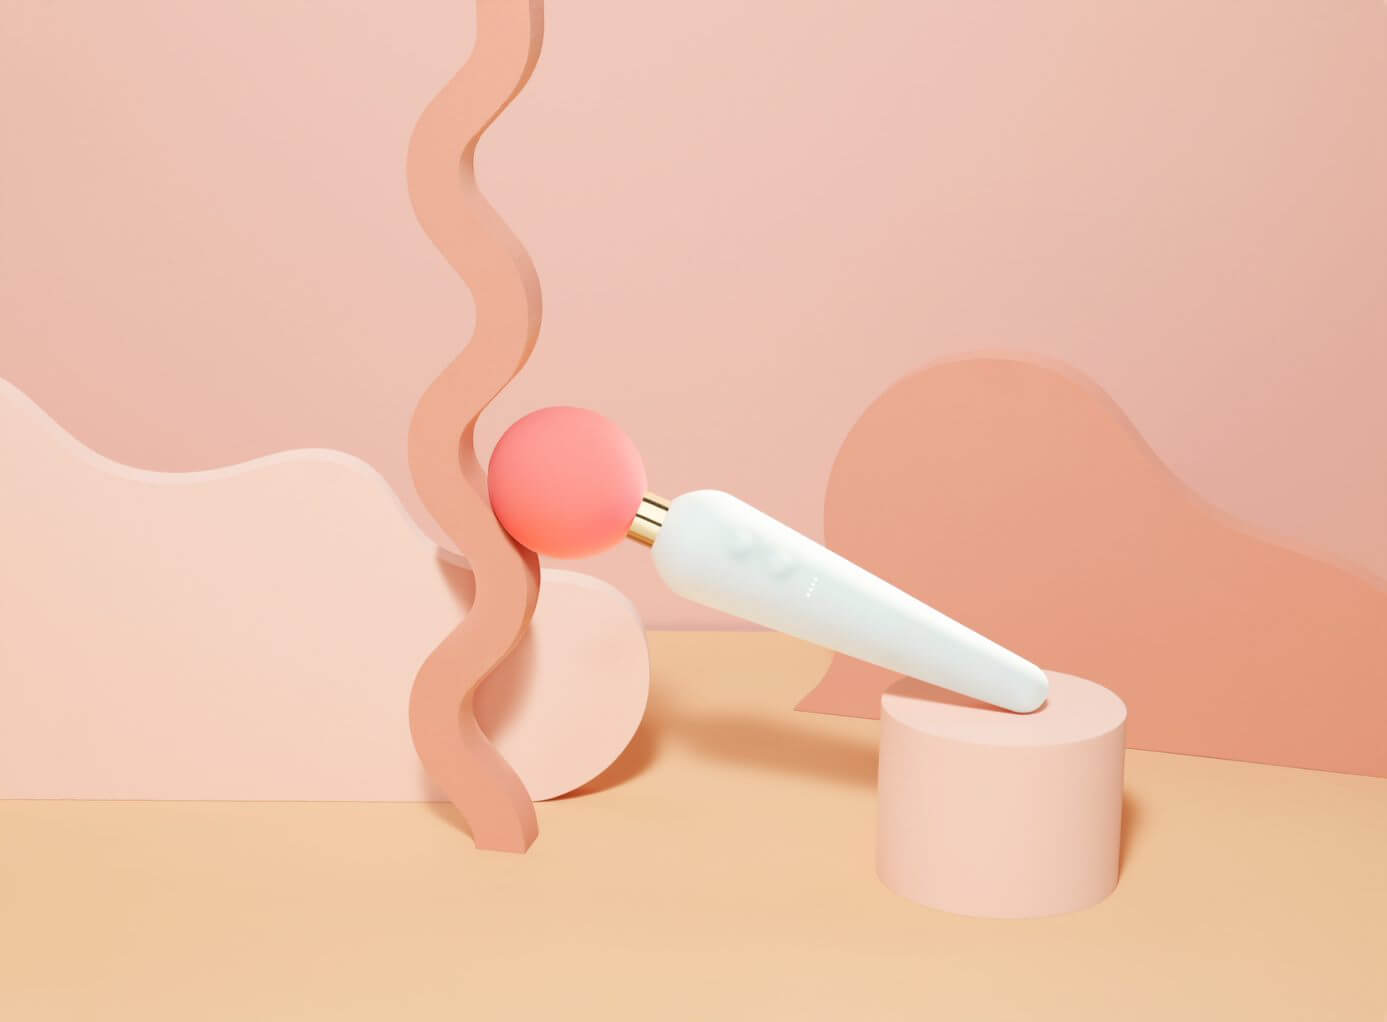 See The Goop Double-Sided Wand Vibrator In Action goop